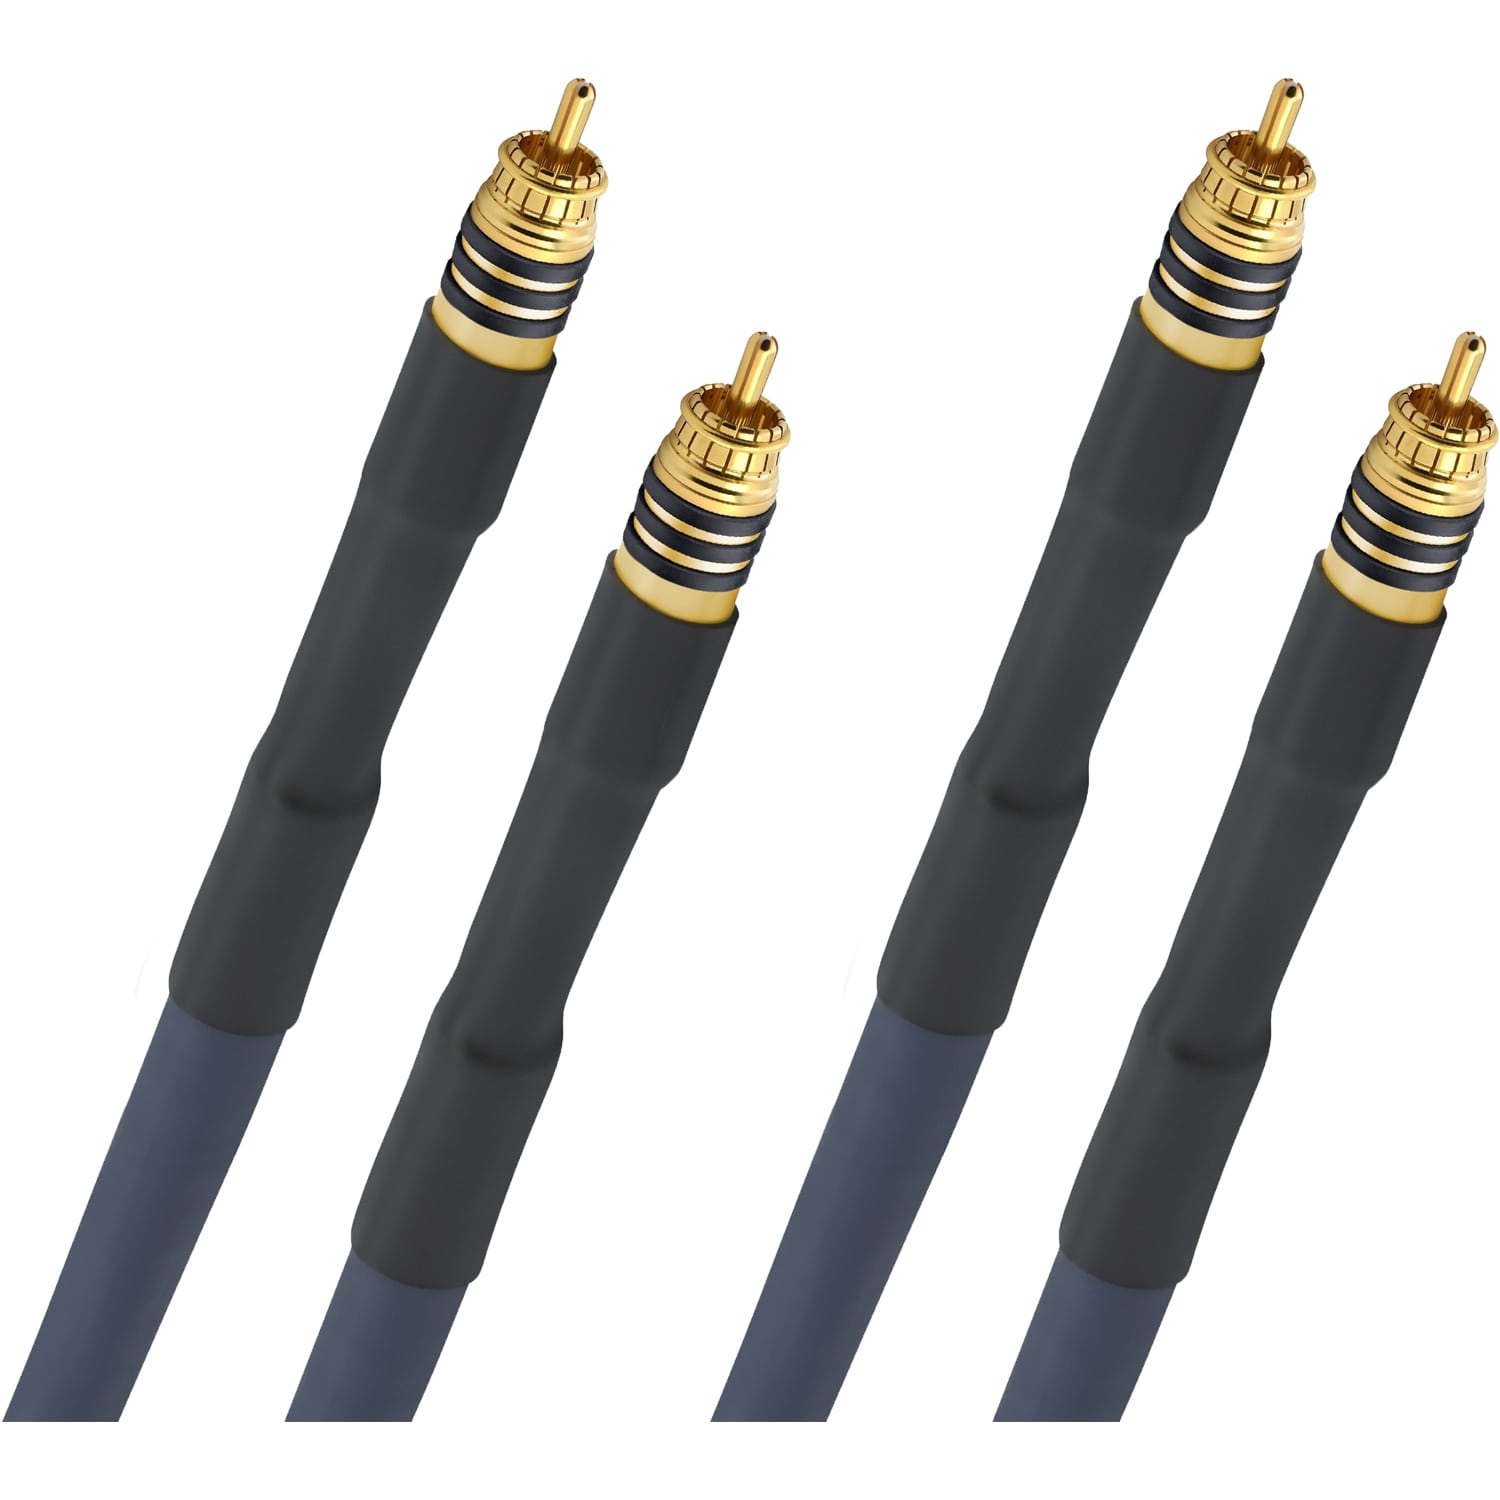 Кабели межблочные аудио Oehlbach STATE OF THE ART XXL Cable RCA, 2x2,00m, gold, D1C13116 кабели межблочные аудио oehlbach state of the art xxl cable rca 2x2 00m gold d1c13116